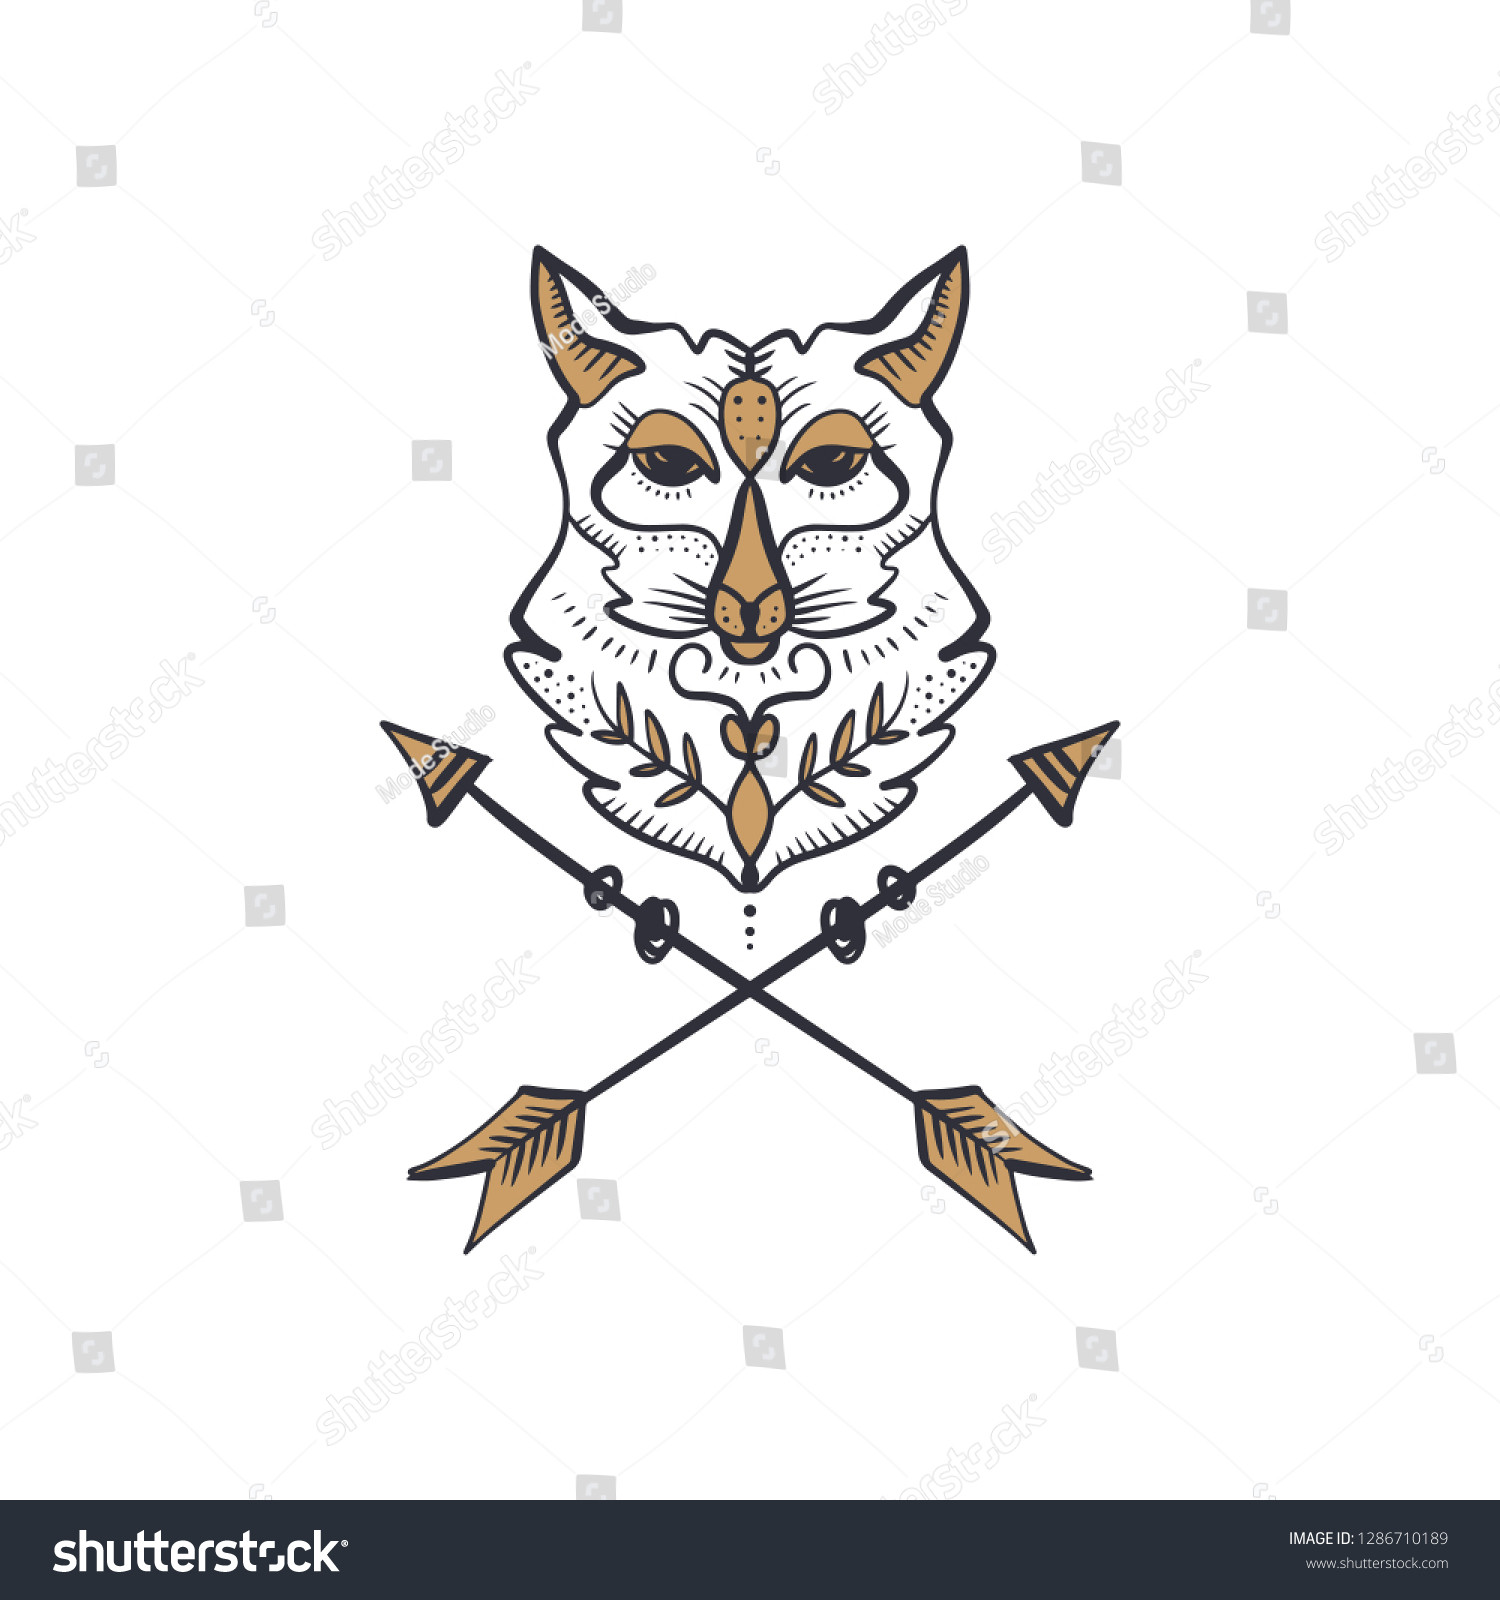 stock vector arrows label beautiful totem wolf or fox boho hippie illustration for sketches of tattoos